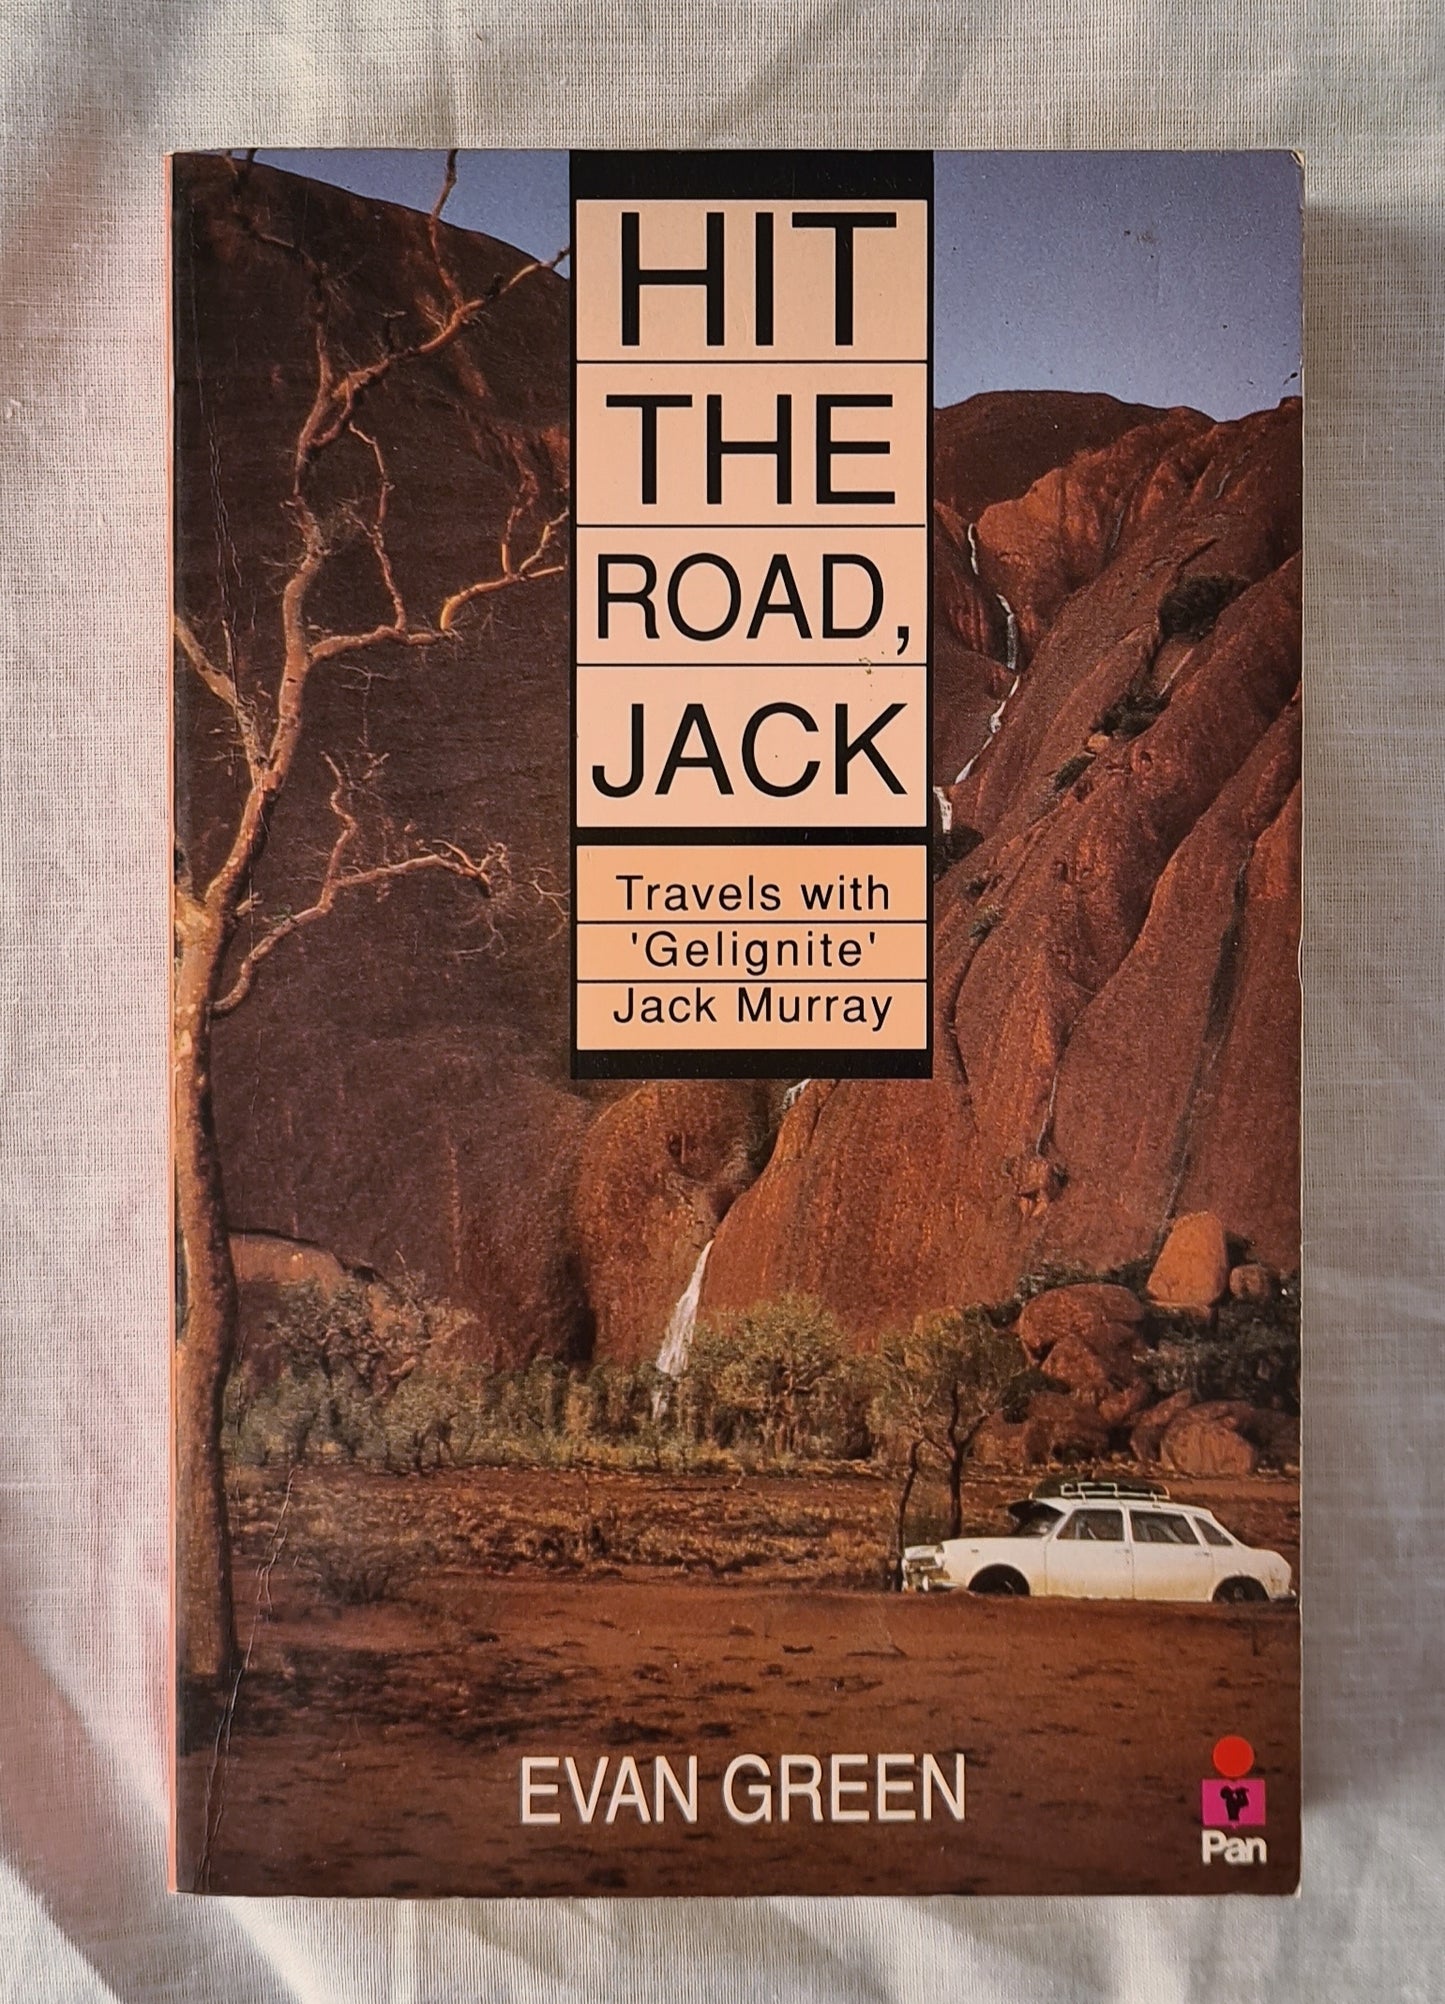 Hit the Road, Jack  Travels with ‘Gelignite’ Jack Murray  by Evan Green